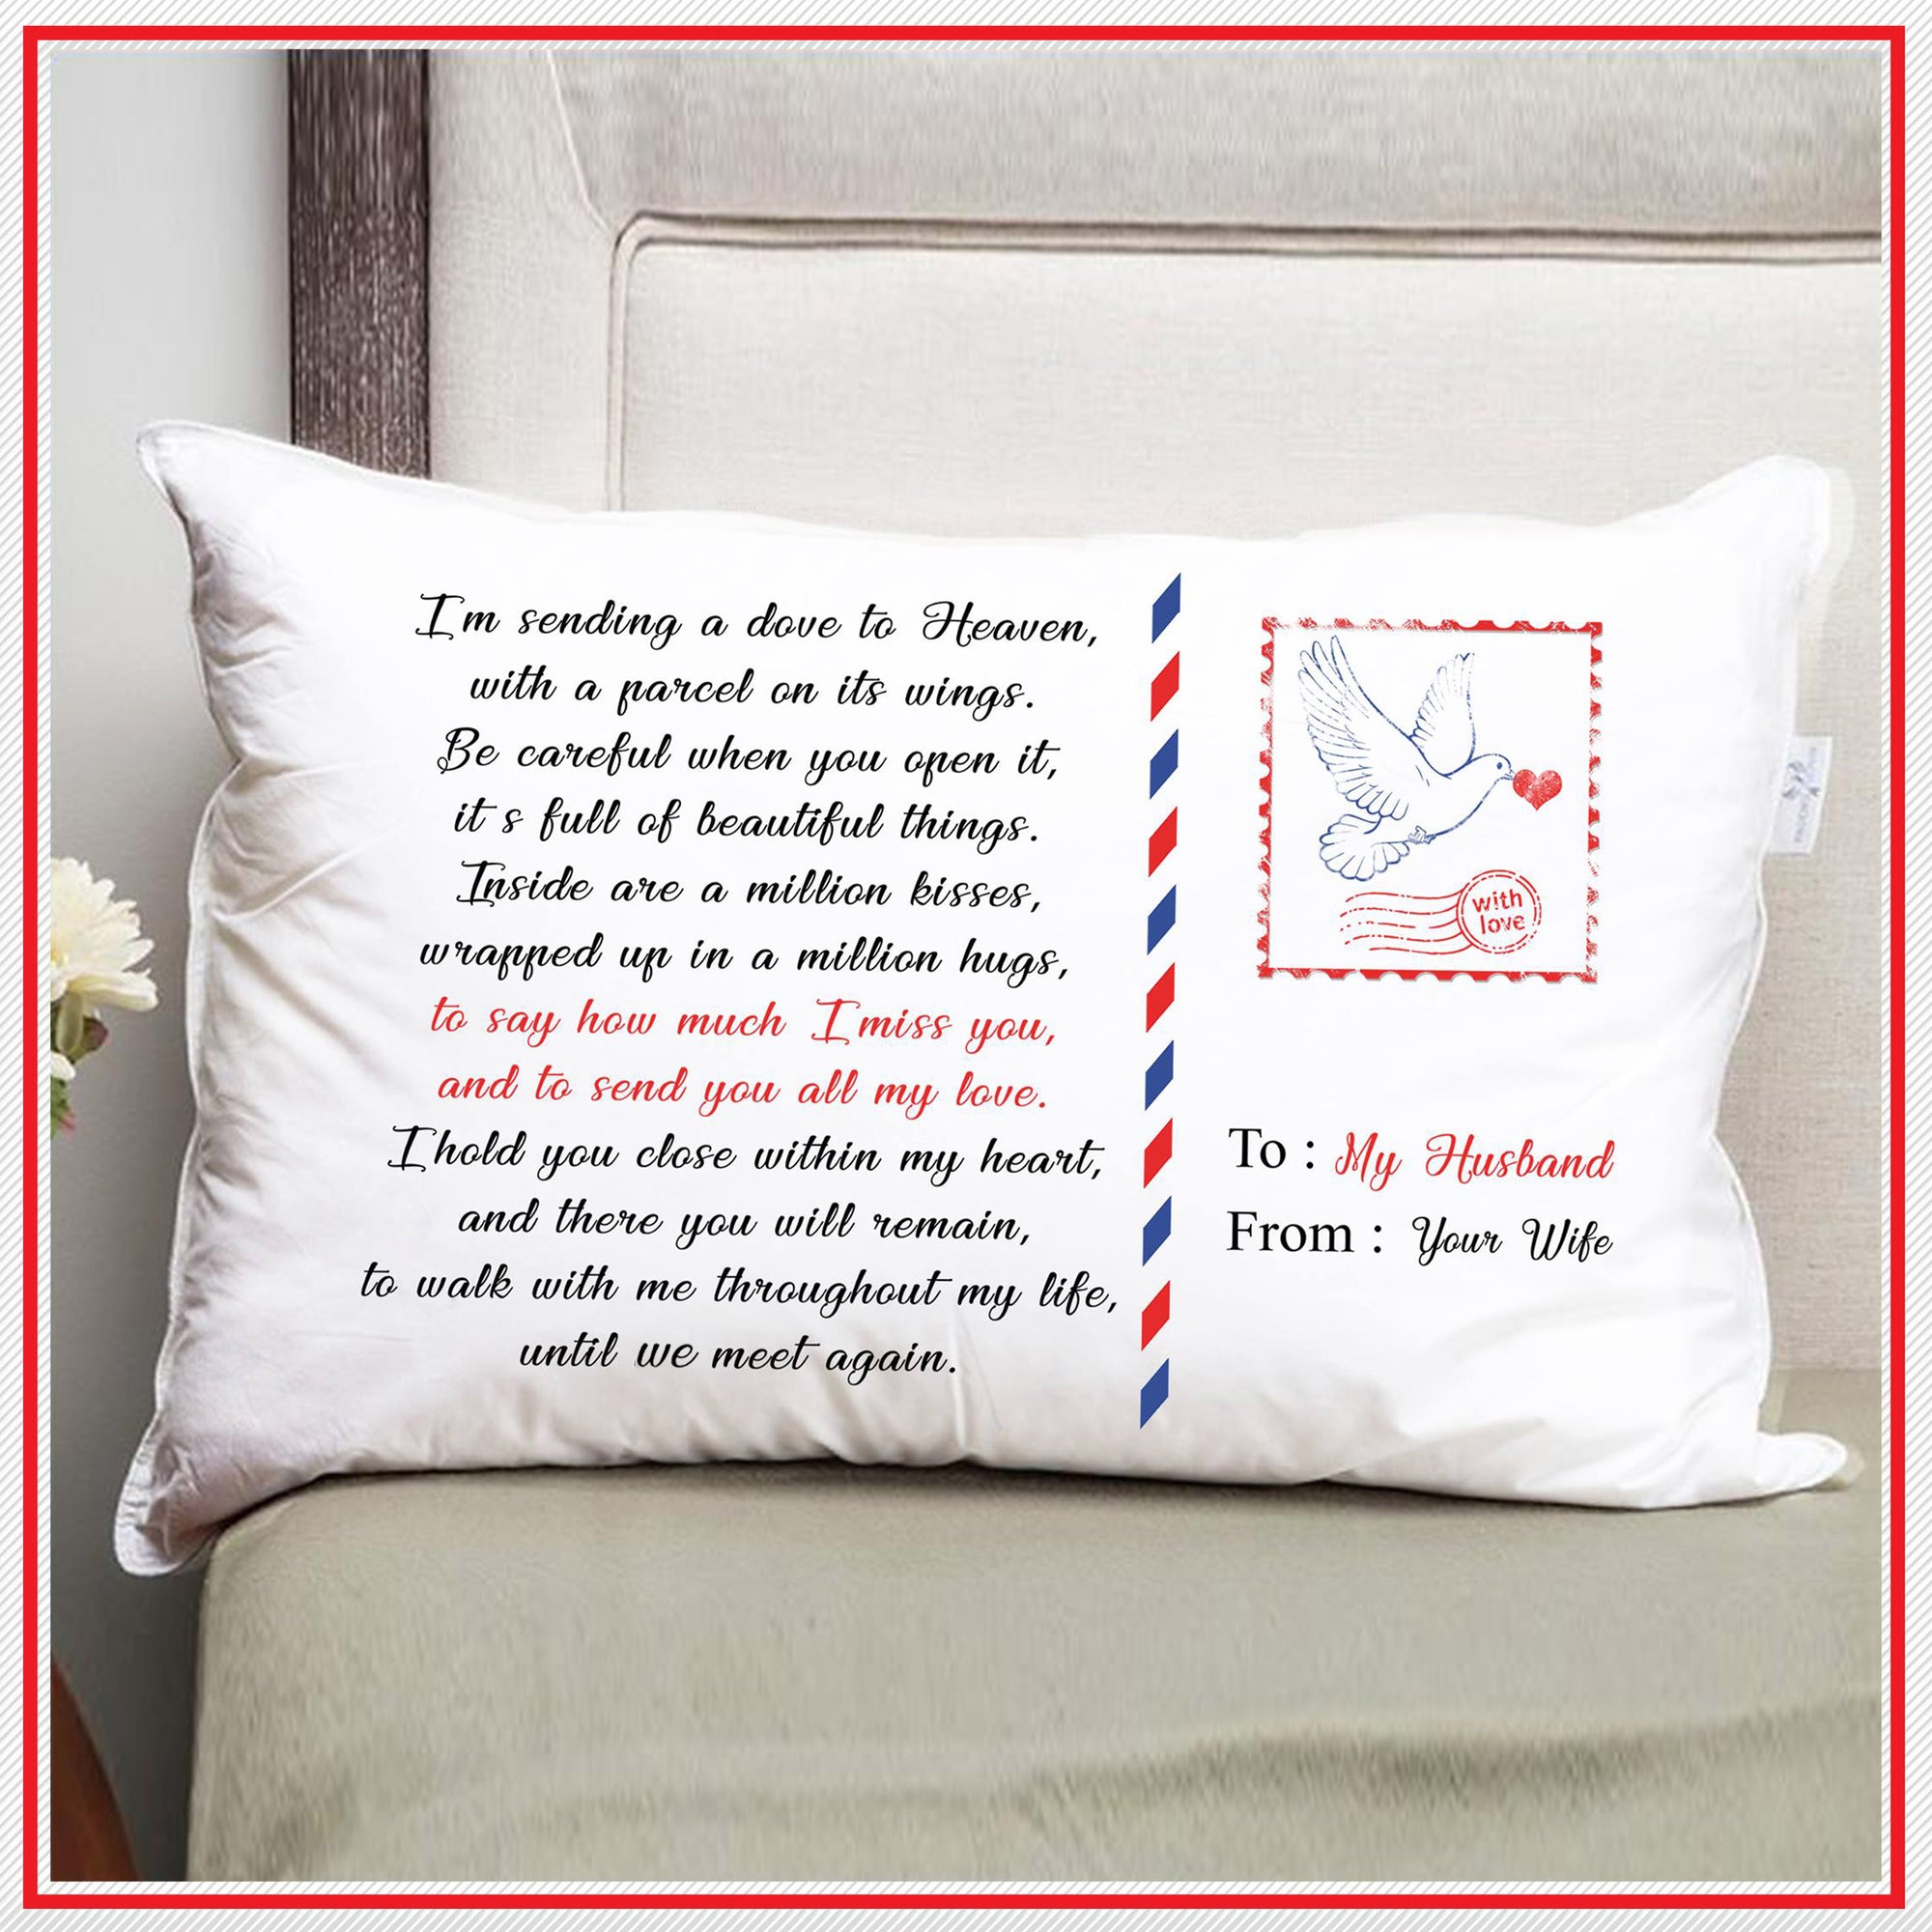 The Letter From a Widow Pillow Case